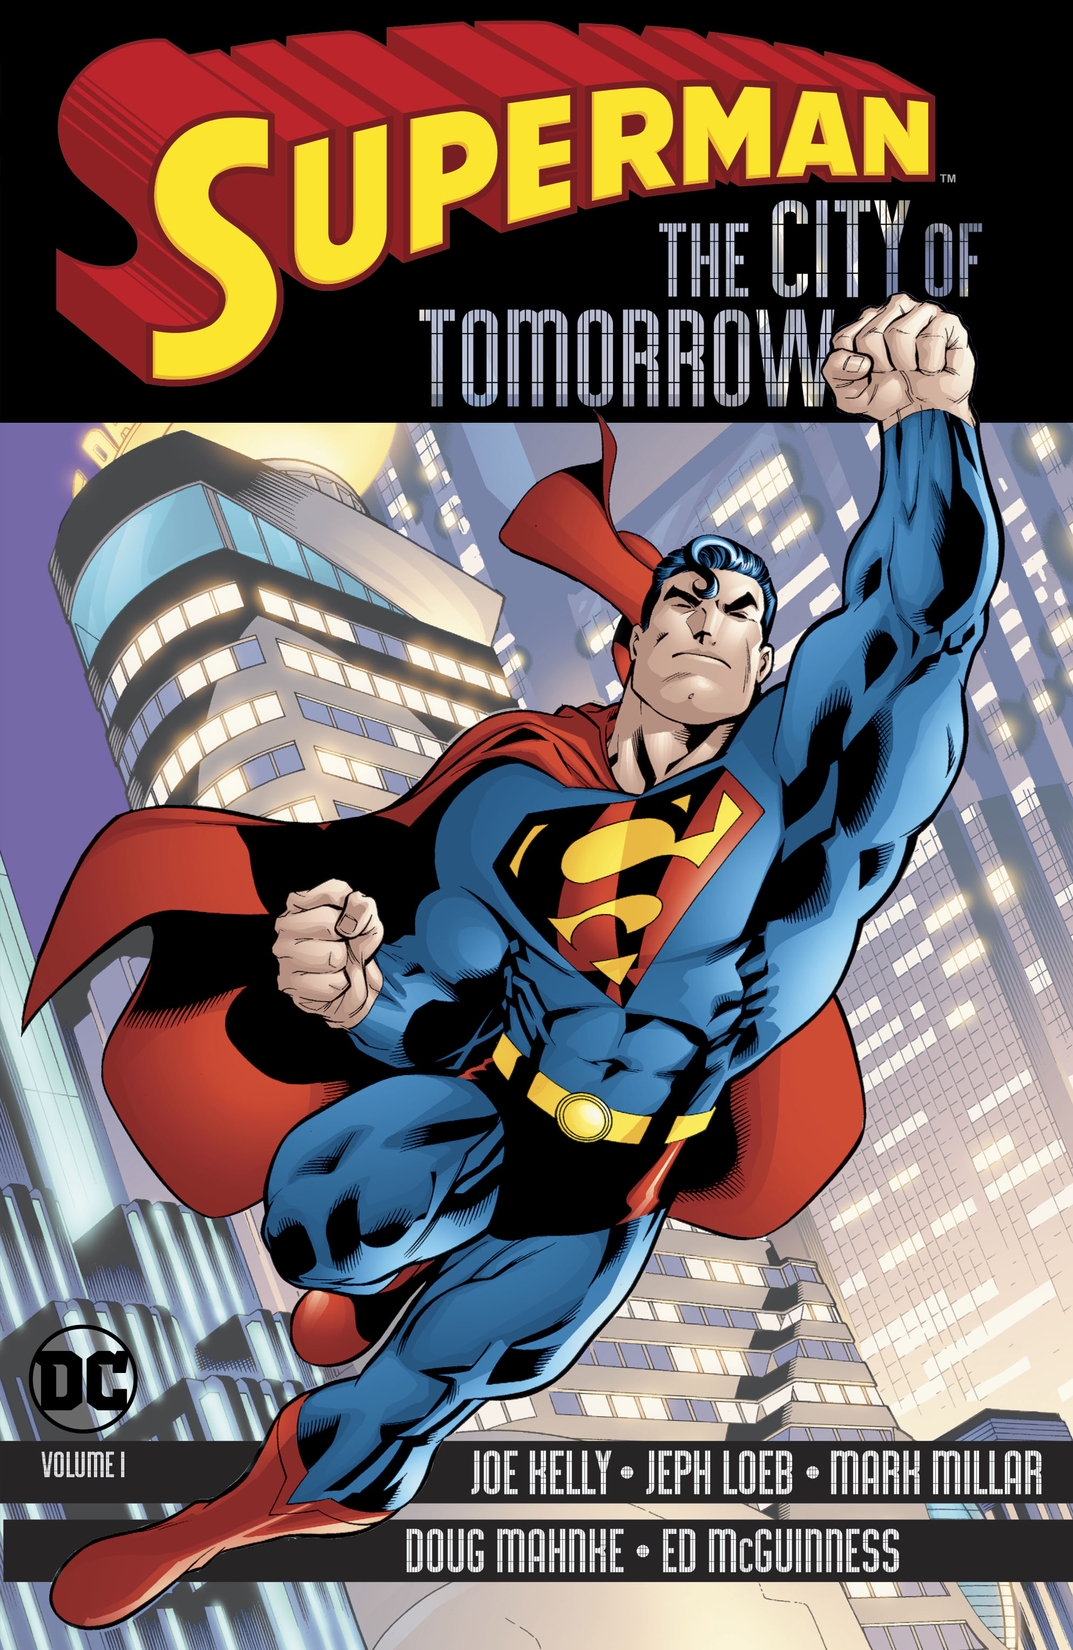 Superman: The City of Tomorrow Vol. 1 preview images